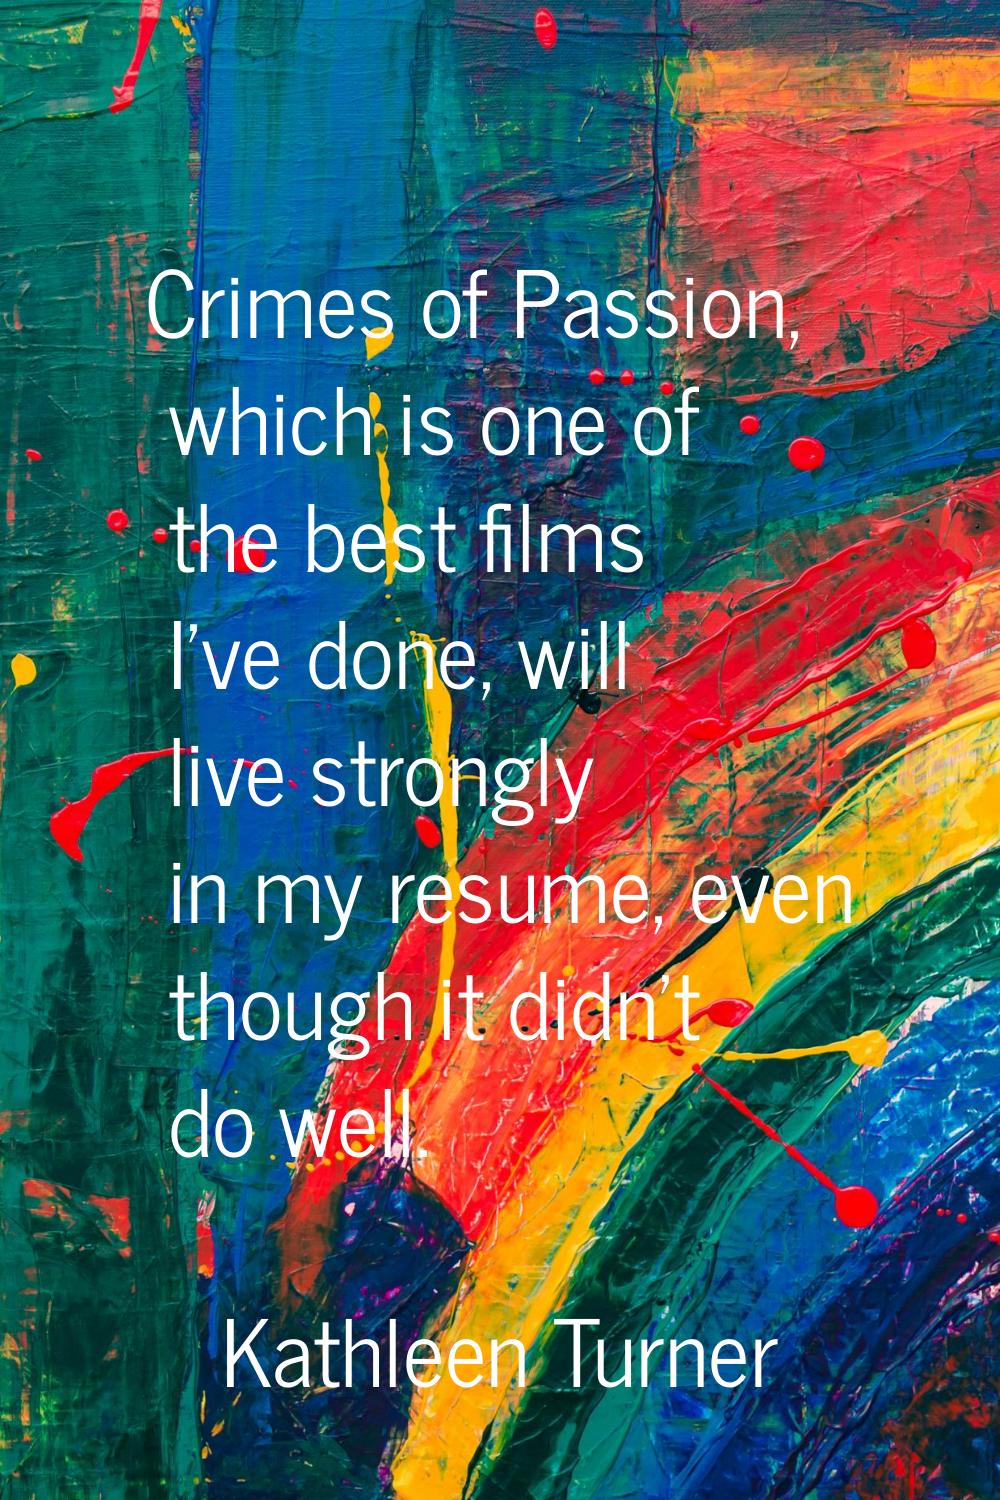 Crimes of Passion, which is one of the best films I've done, will live strongly in my resume, even 